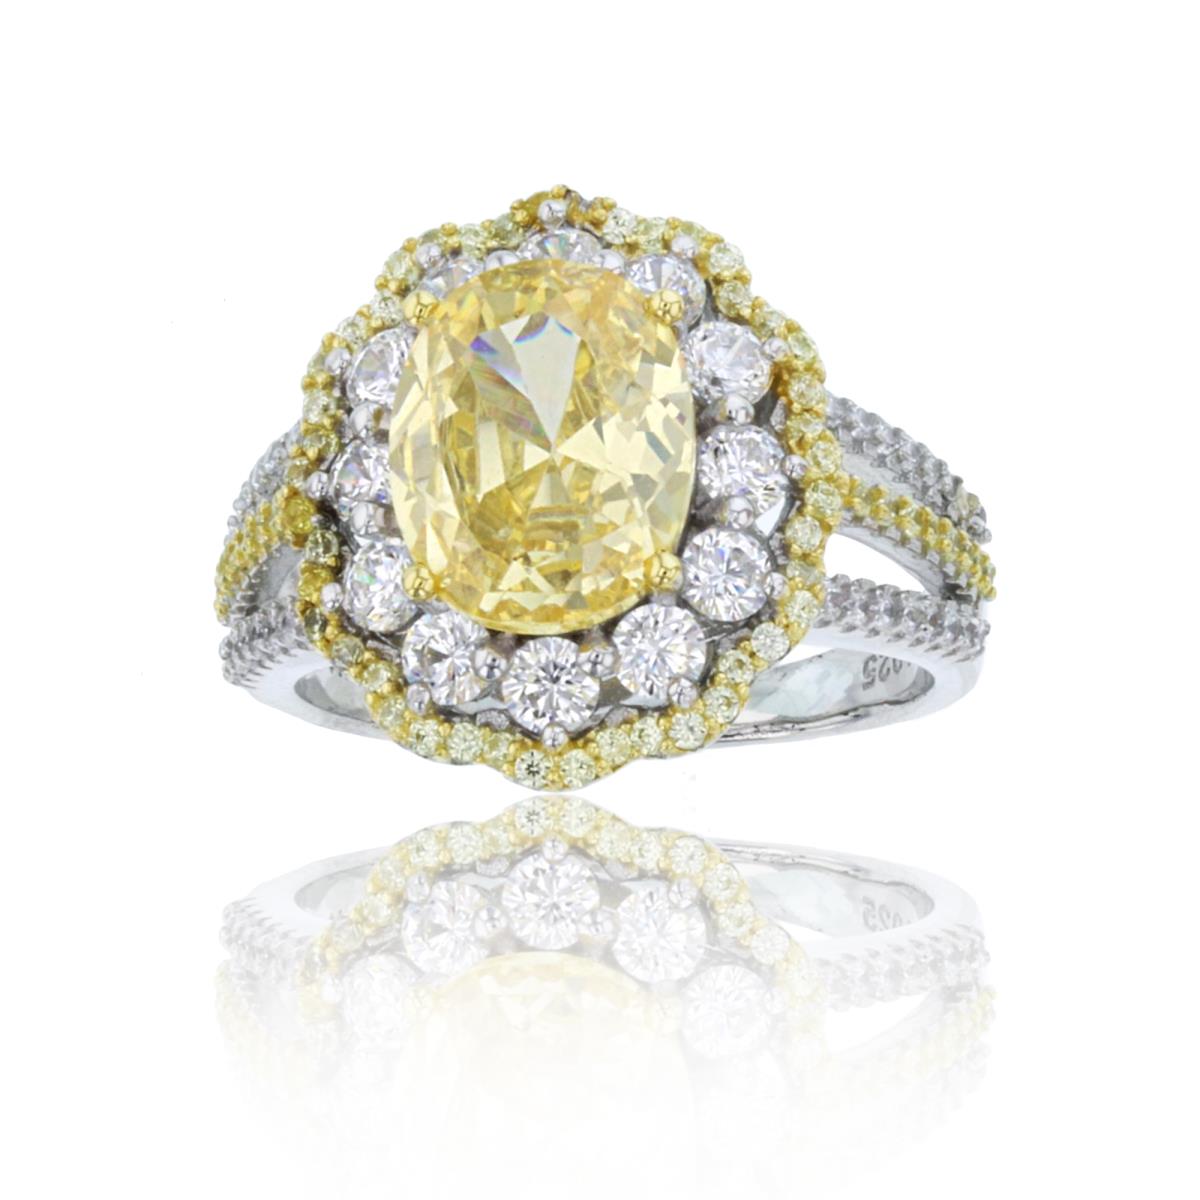 Sterling Silver Two-Tone 10x8mm Ov Yellow Canary CZ Center & Rnd White/Yellow CZ Halo Ring